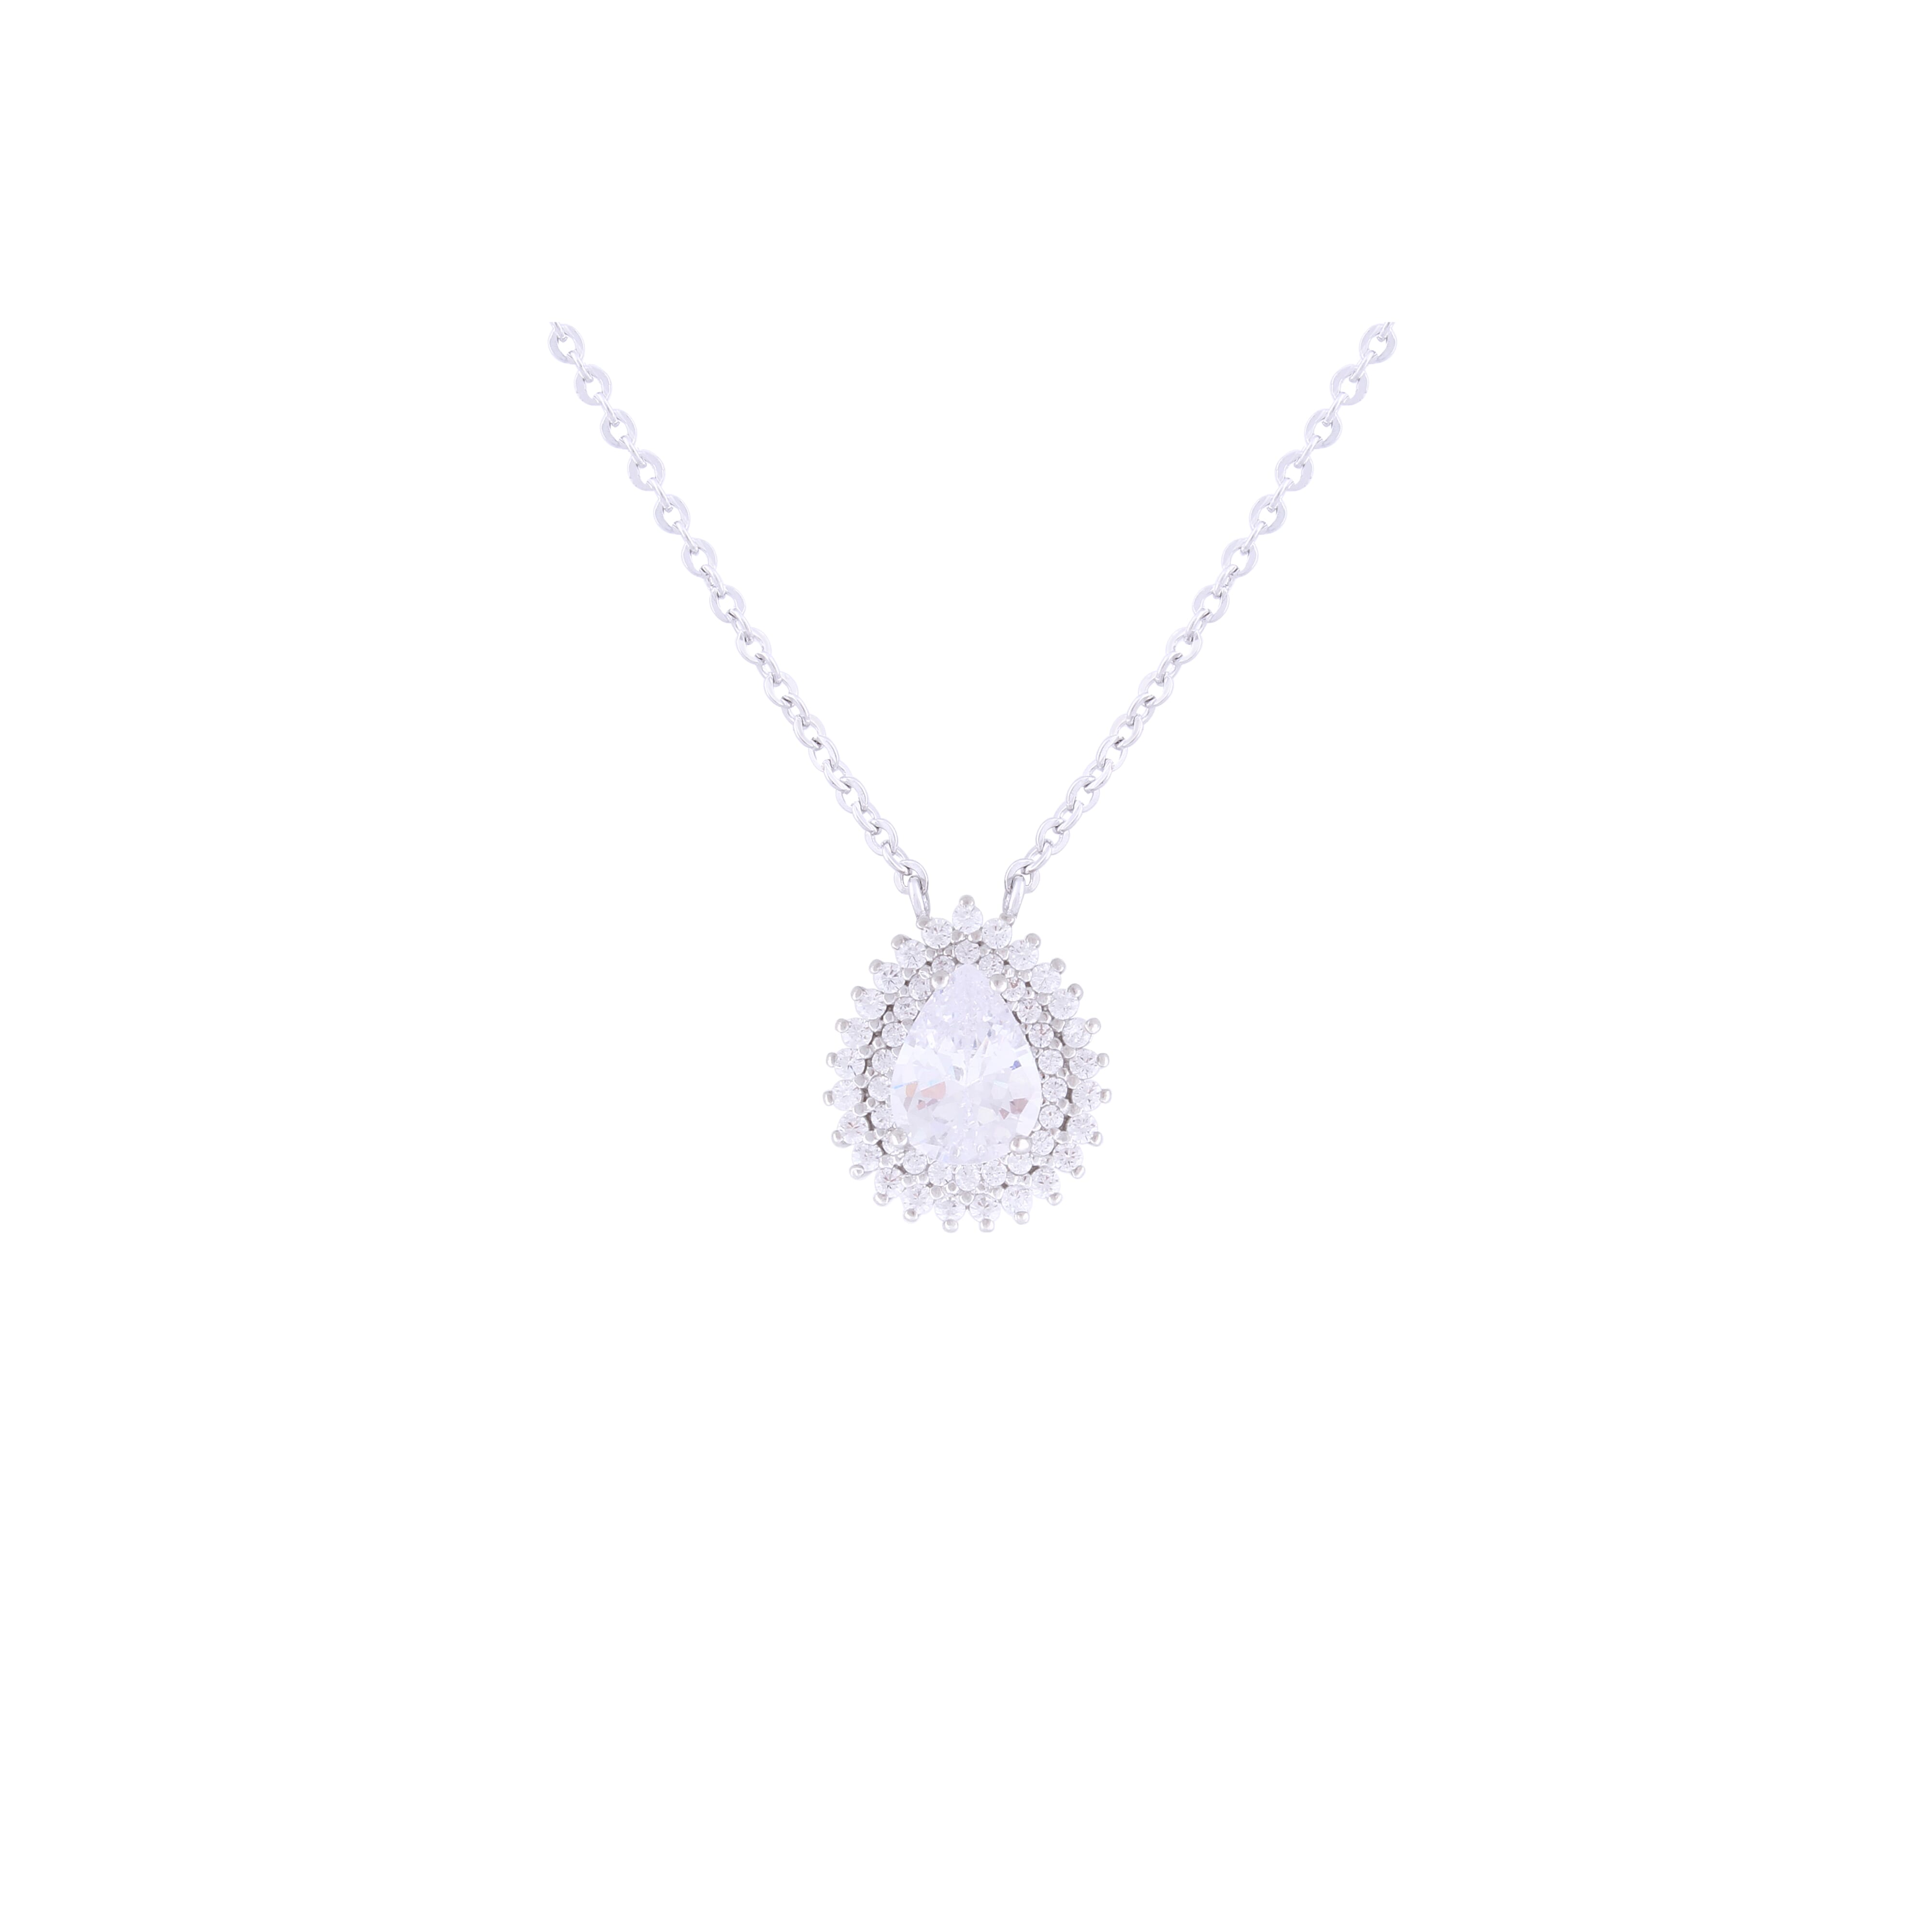 Asfour Crystal 925 Sterling Silver Chain Necklace With Zircon Stones